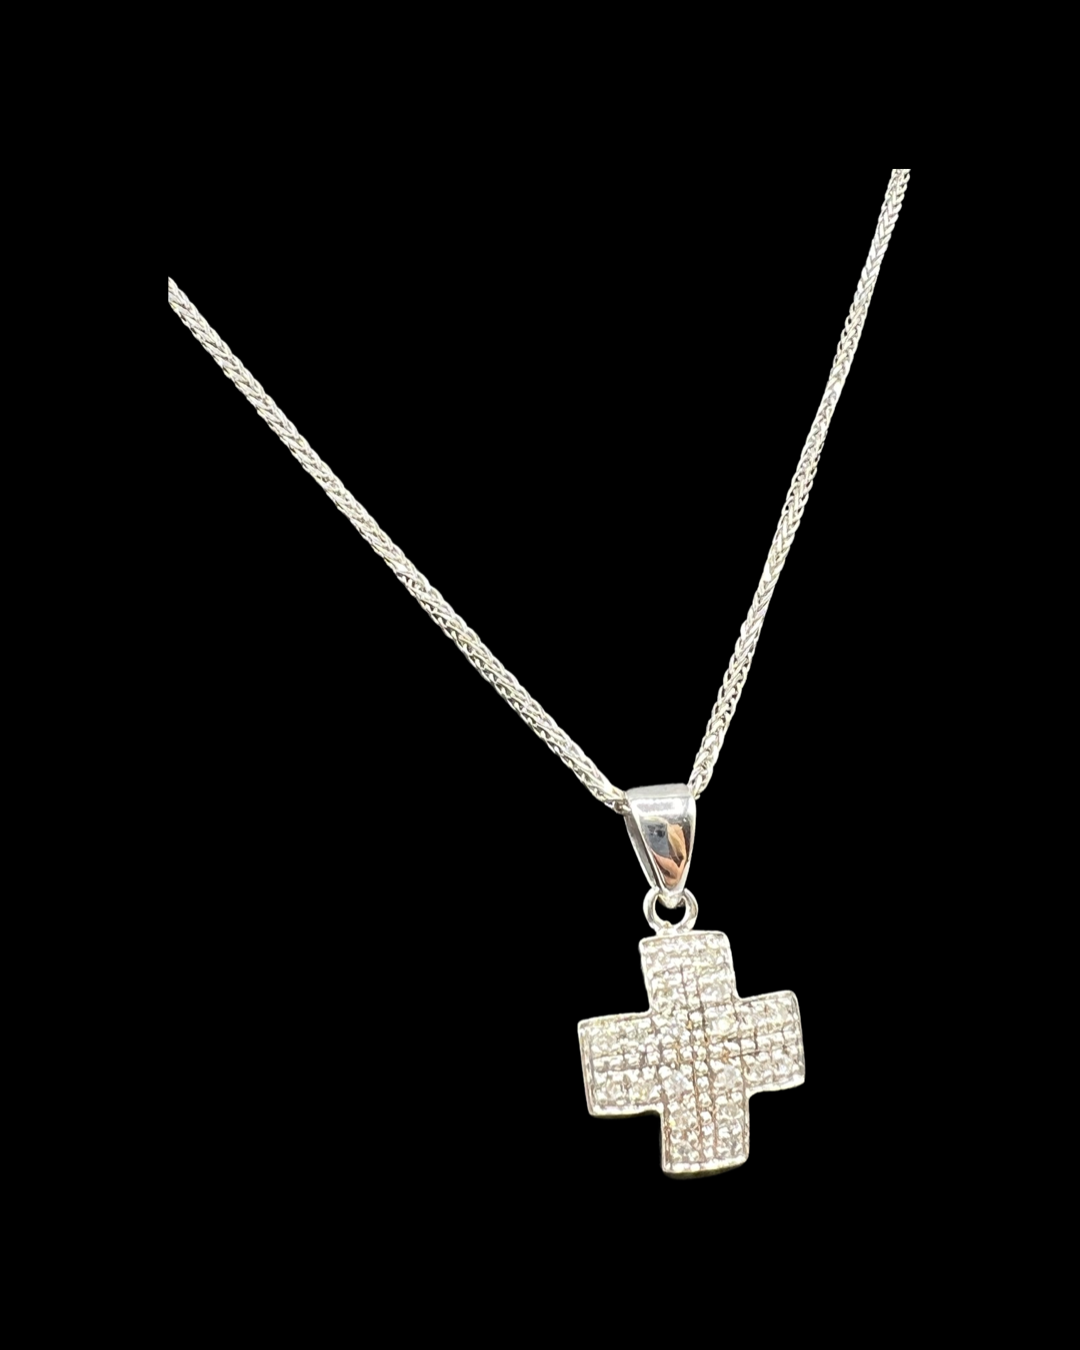 9ct White Gold & 3/4ct Diamond Set Cross & Chain 46cm in length - Very Good Condition - 4.2 grams - Image 2 of 2